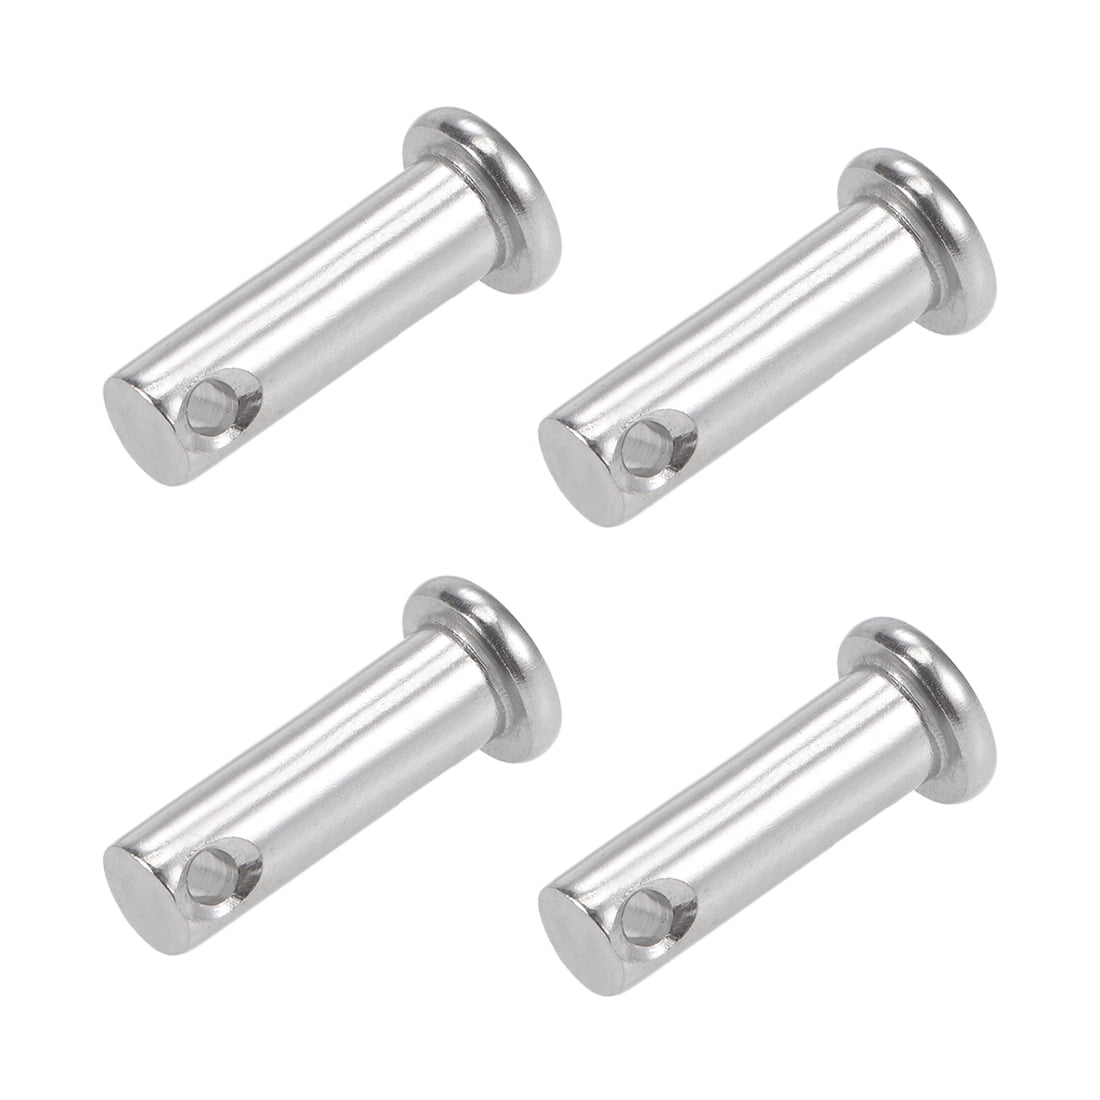 8mm x 25mm Flat Head 304 Stainless Steel Link Hinge Details about   Single Hole Clevis Pins